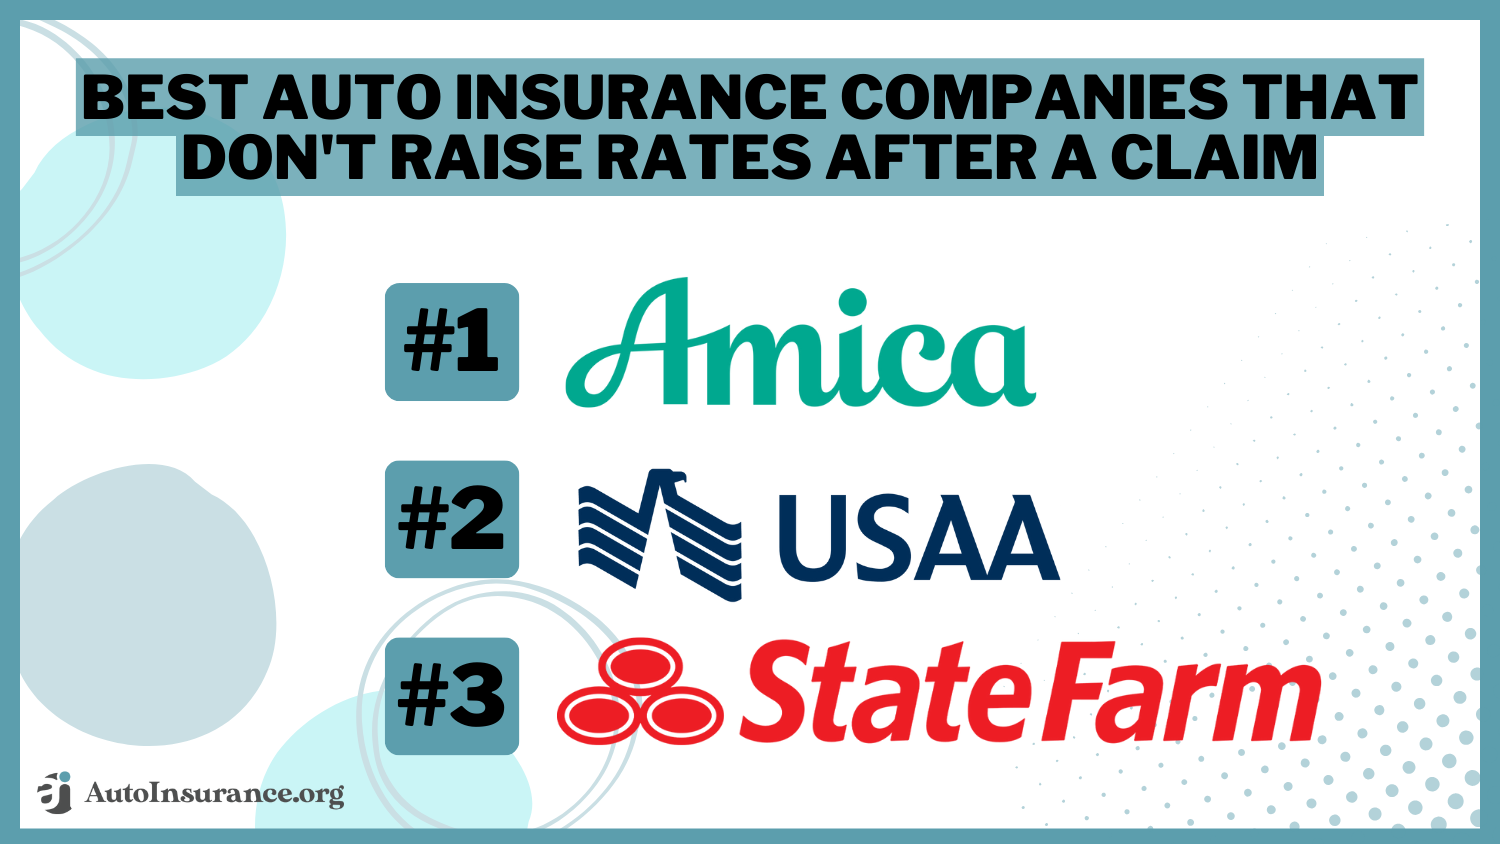 Best Auto Insurance Companies That Don't Raise Rates After a Claim